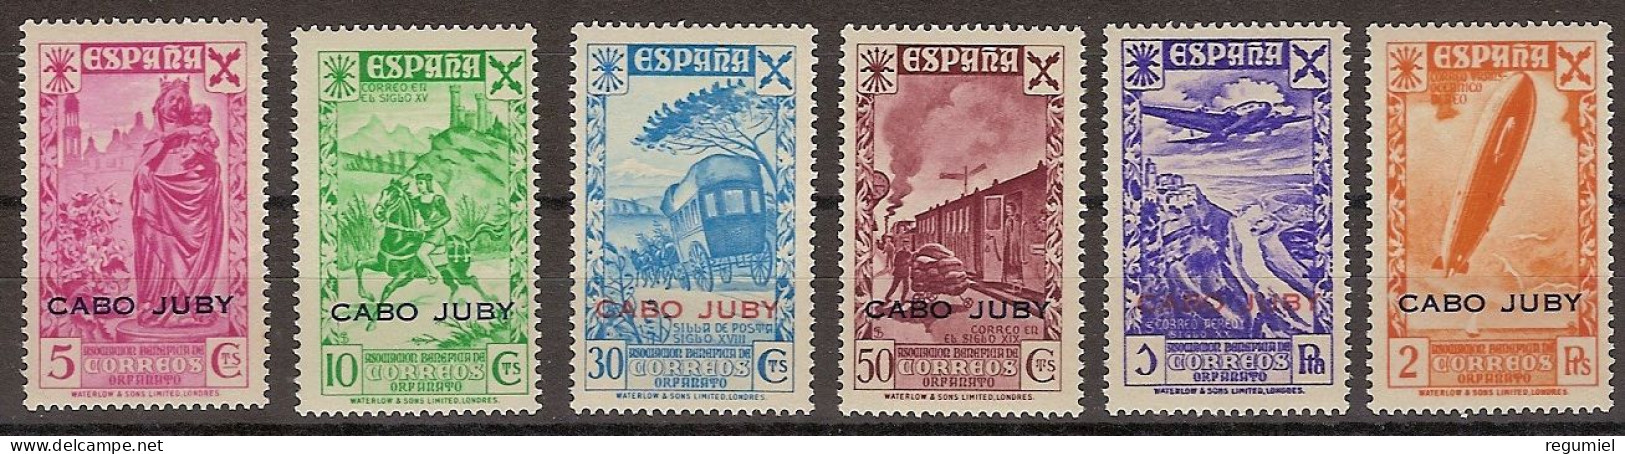 Cabo Juby Beneficencia 12/17 ** MNH. 1943 - Cape Juby